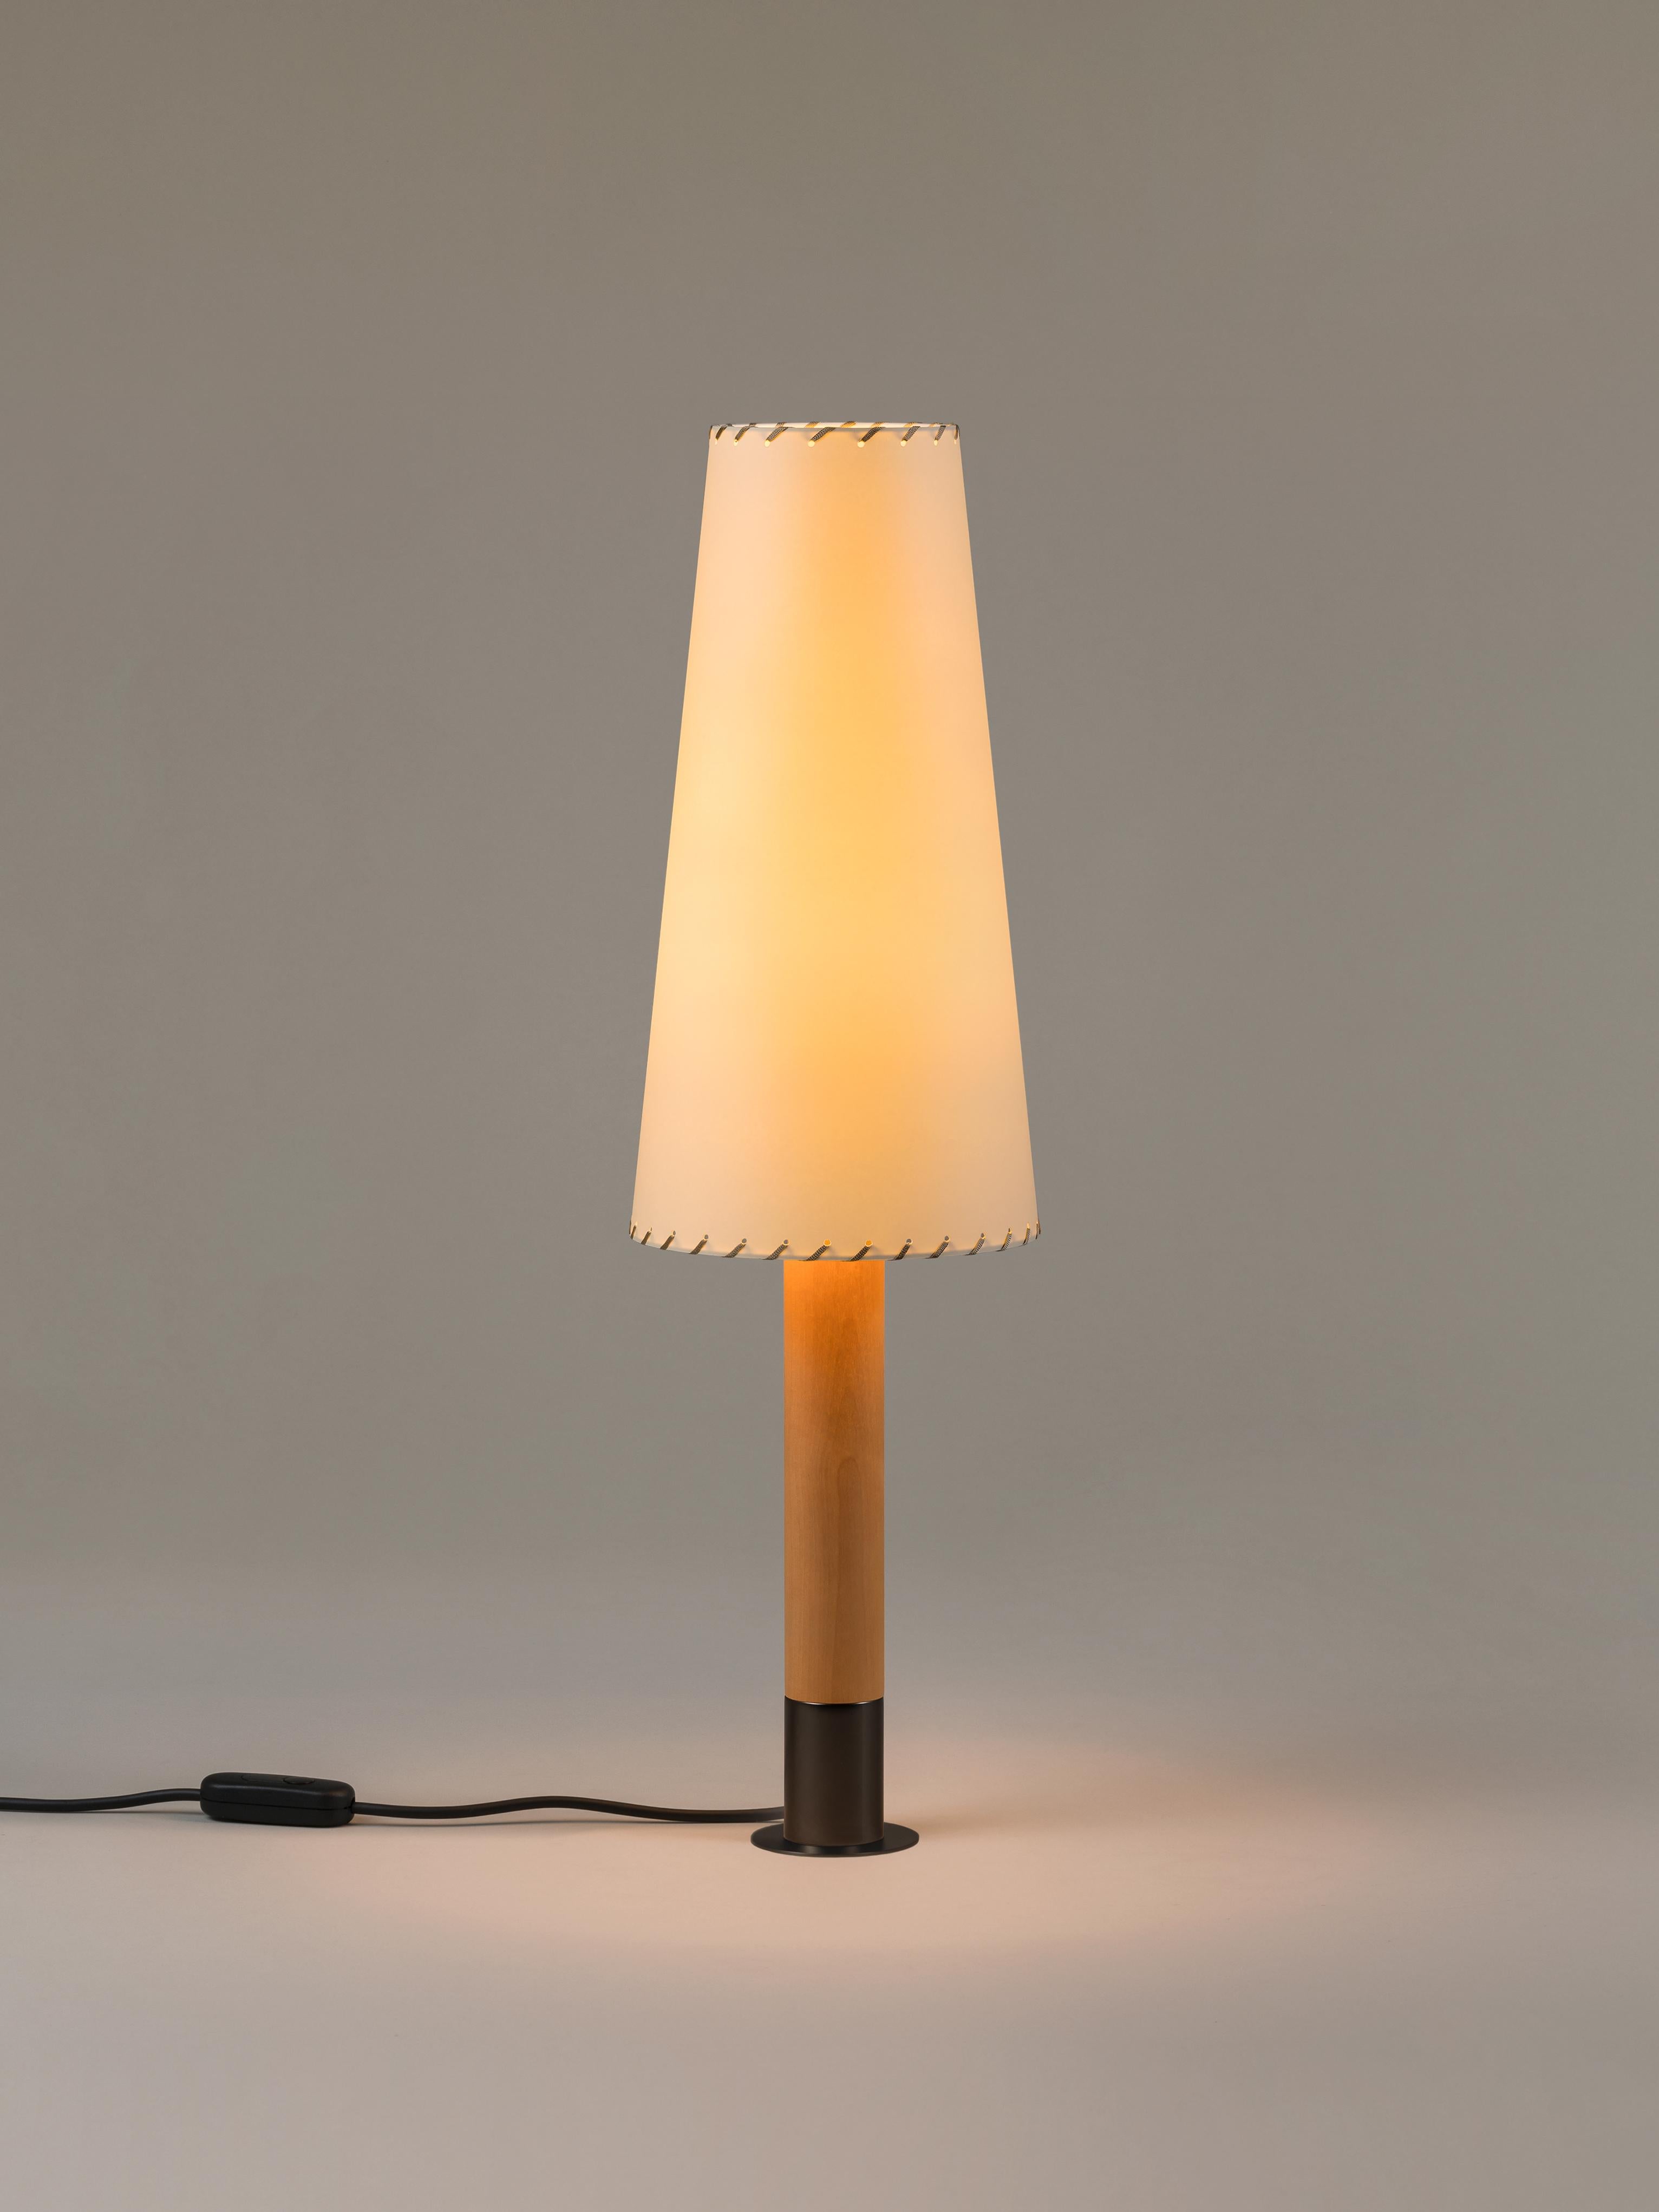 Bronze Básica M2 table lamp by Santiago Roqueta, Santa & Cole
Dimensions: D 20 x H 71 cm
Materials: Bronze, birch wood, paperboard.
Available in nickel or bronze and with or without the stabilizing disc.

The Básica lamp champions the return to